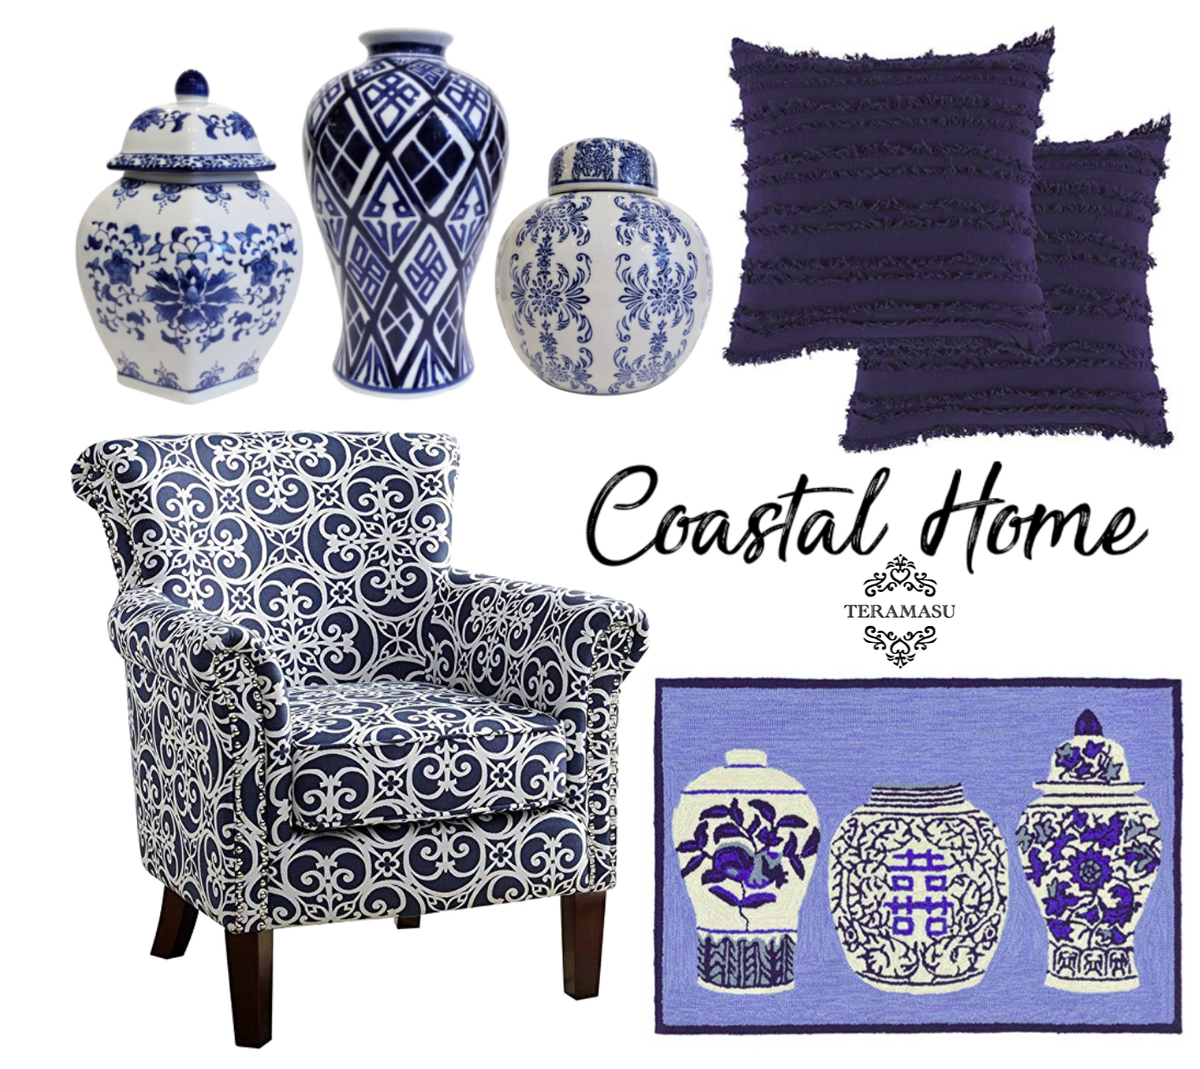 "Want It" Wednesday: Gorgeous Blue and White Coastal Home Inspiration from Teramasu